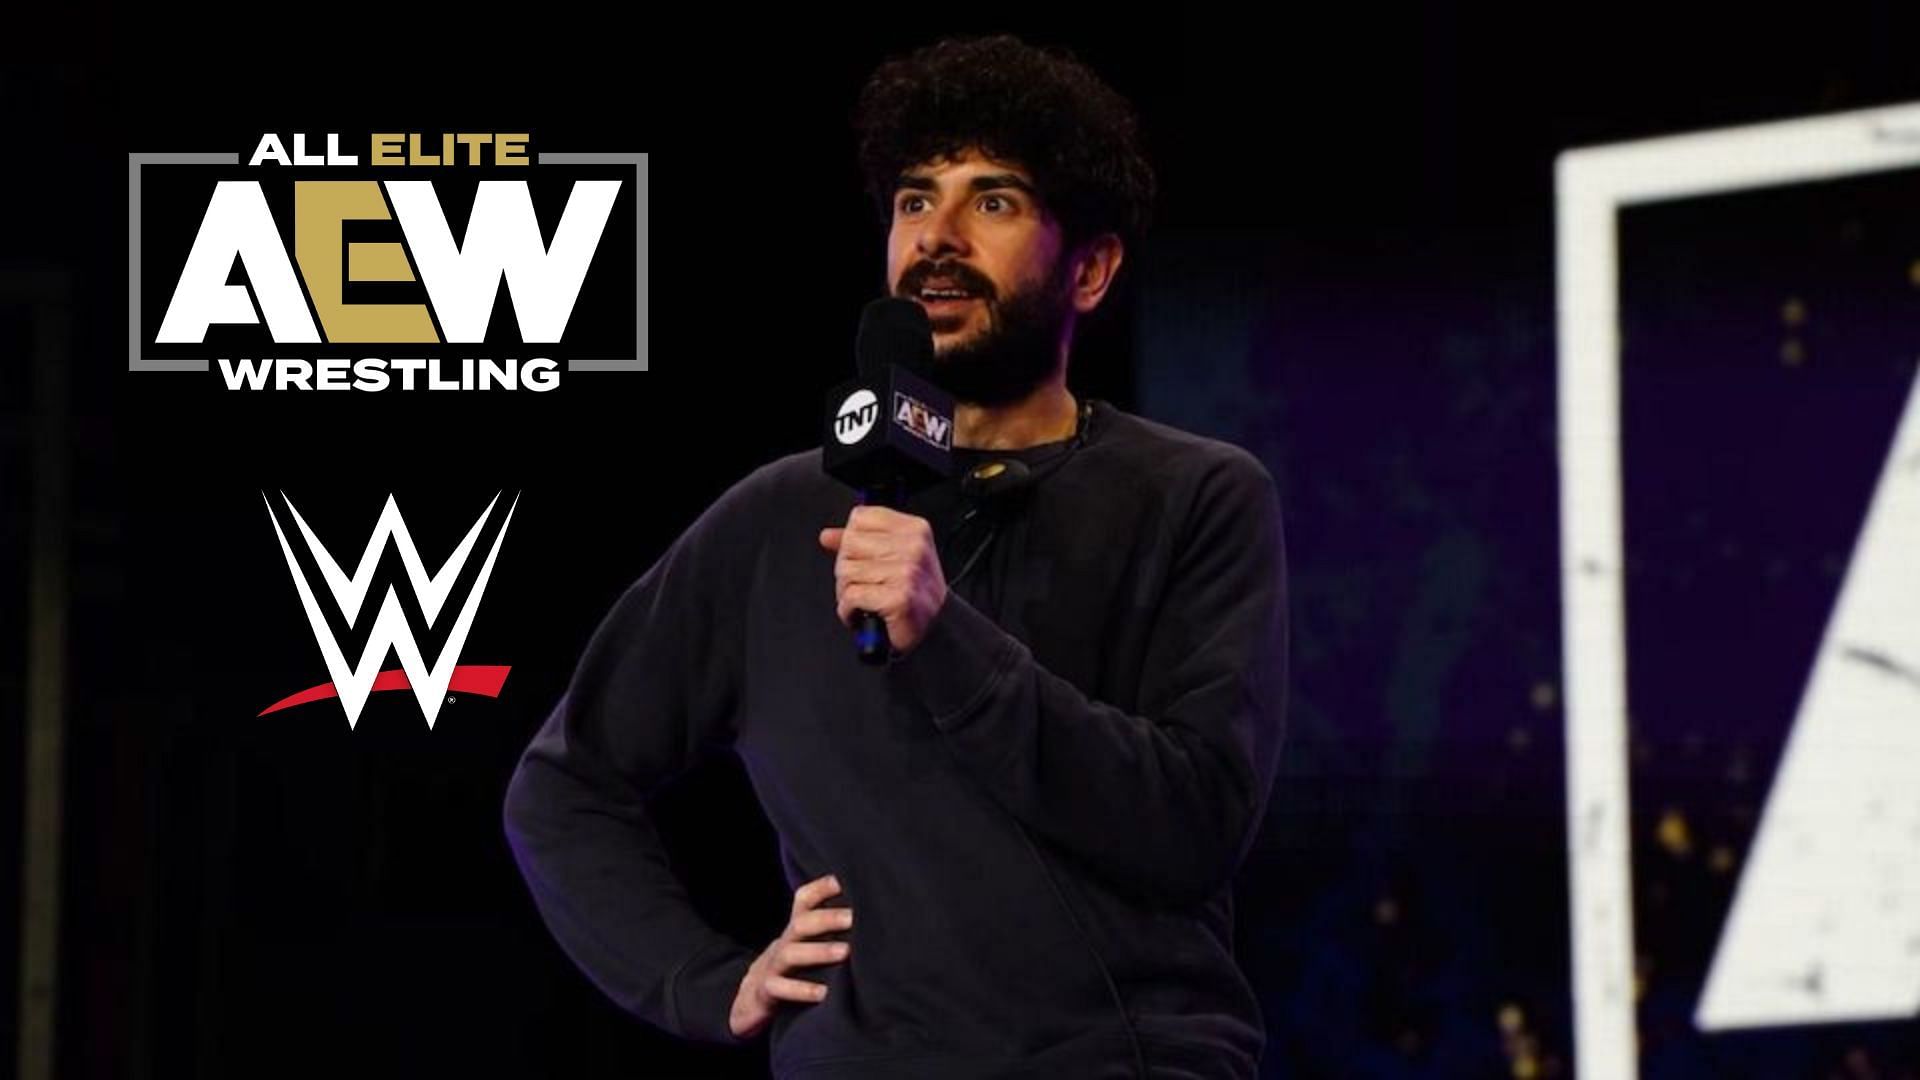 AEW CEO Tony Khan is giving an packed with action Dynamite tonight